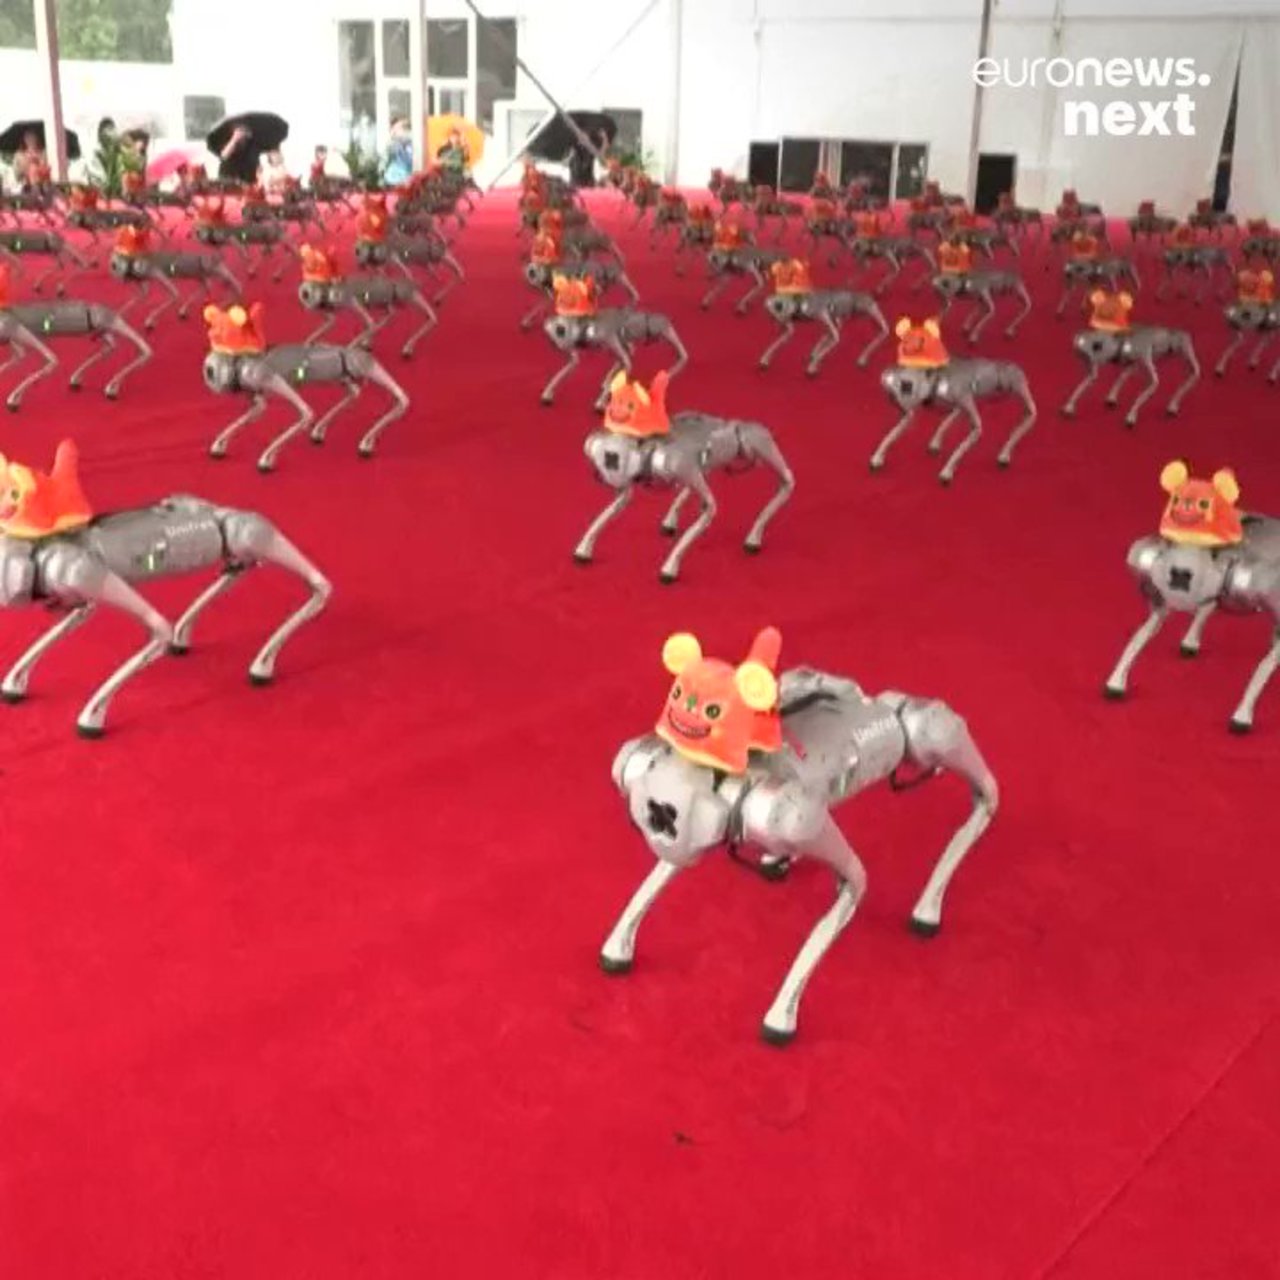 Highlights of the annual World #Robot Conference in Beijing by @euronewsnext #AI #ArtificialIntelligence #MI #Robotics #Engineering #Innovation #FutureOfWork #Tech #Technology cc: @terenceleungsf @wil_bielert @ronald_vanloon https://t.co/BOlLiPqUp7